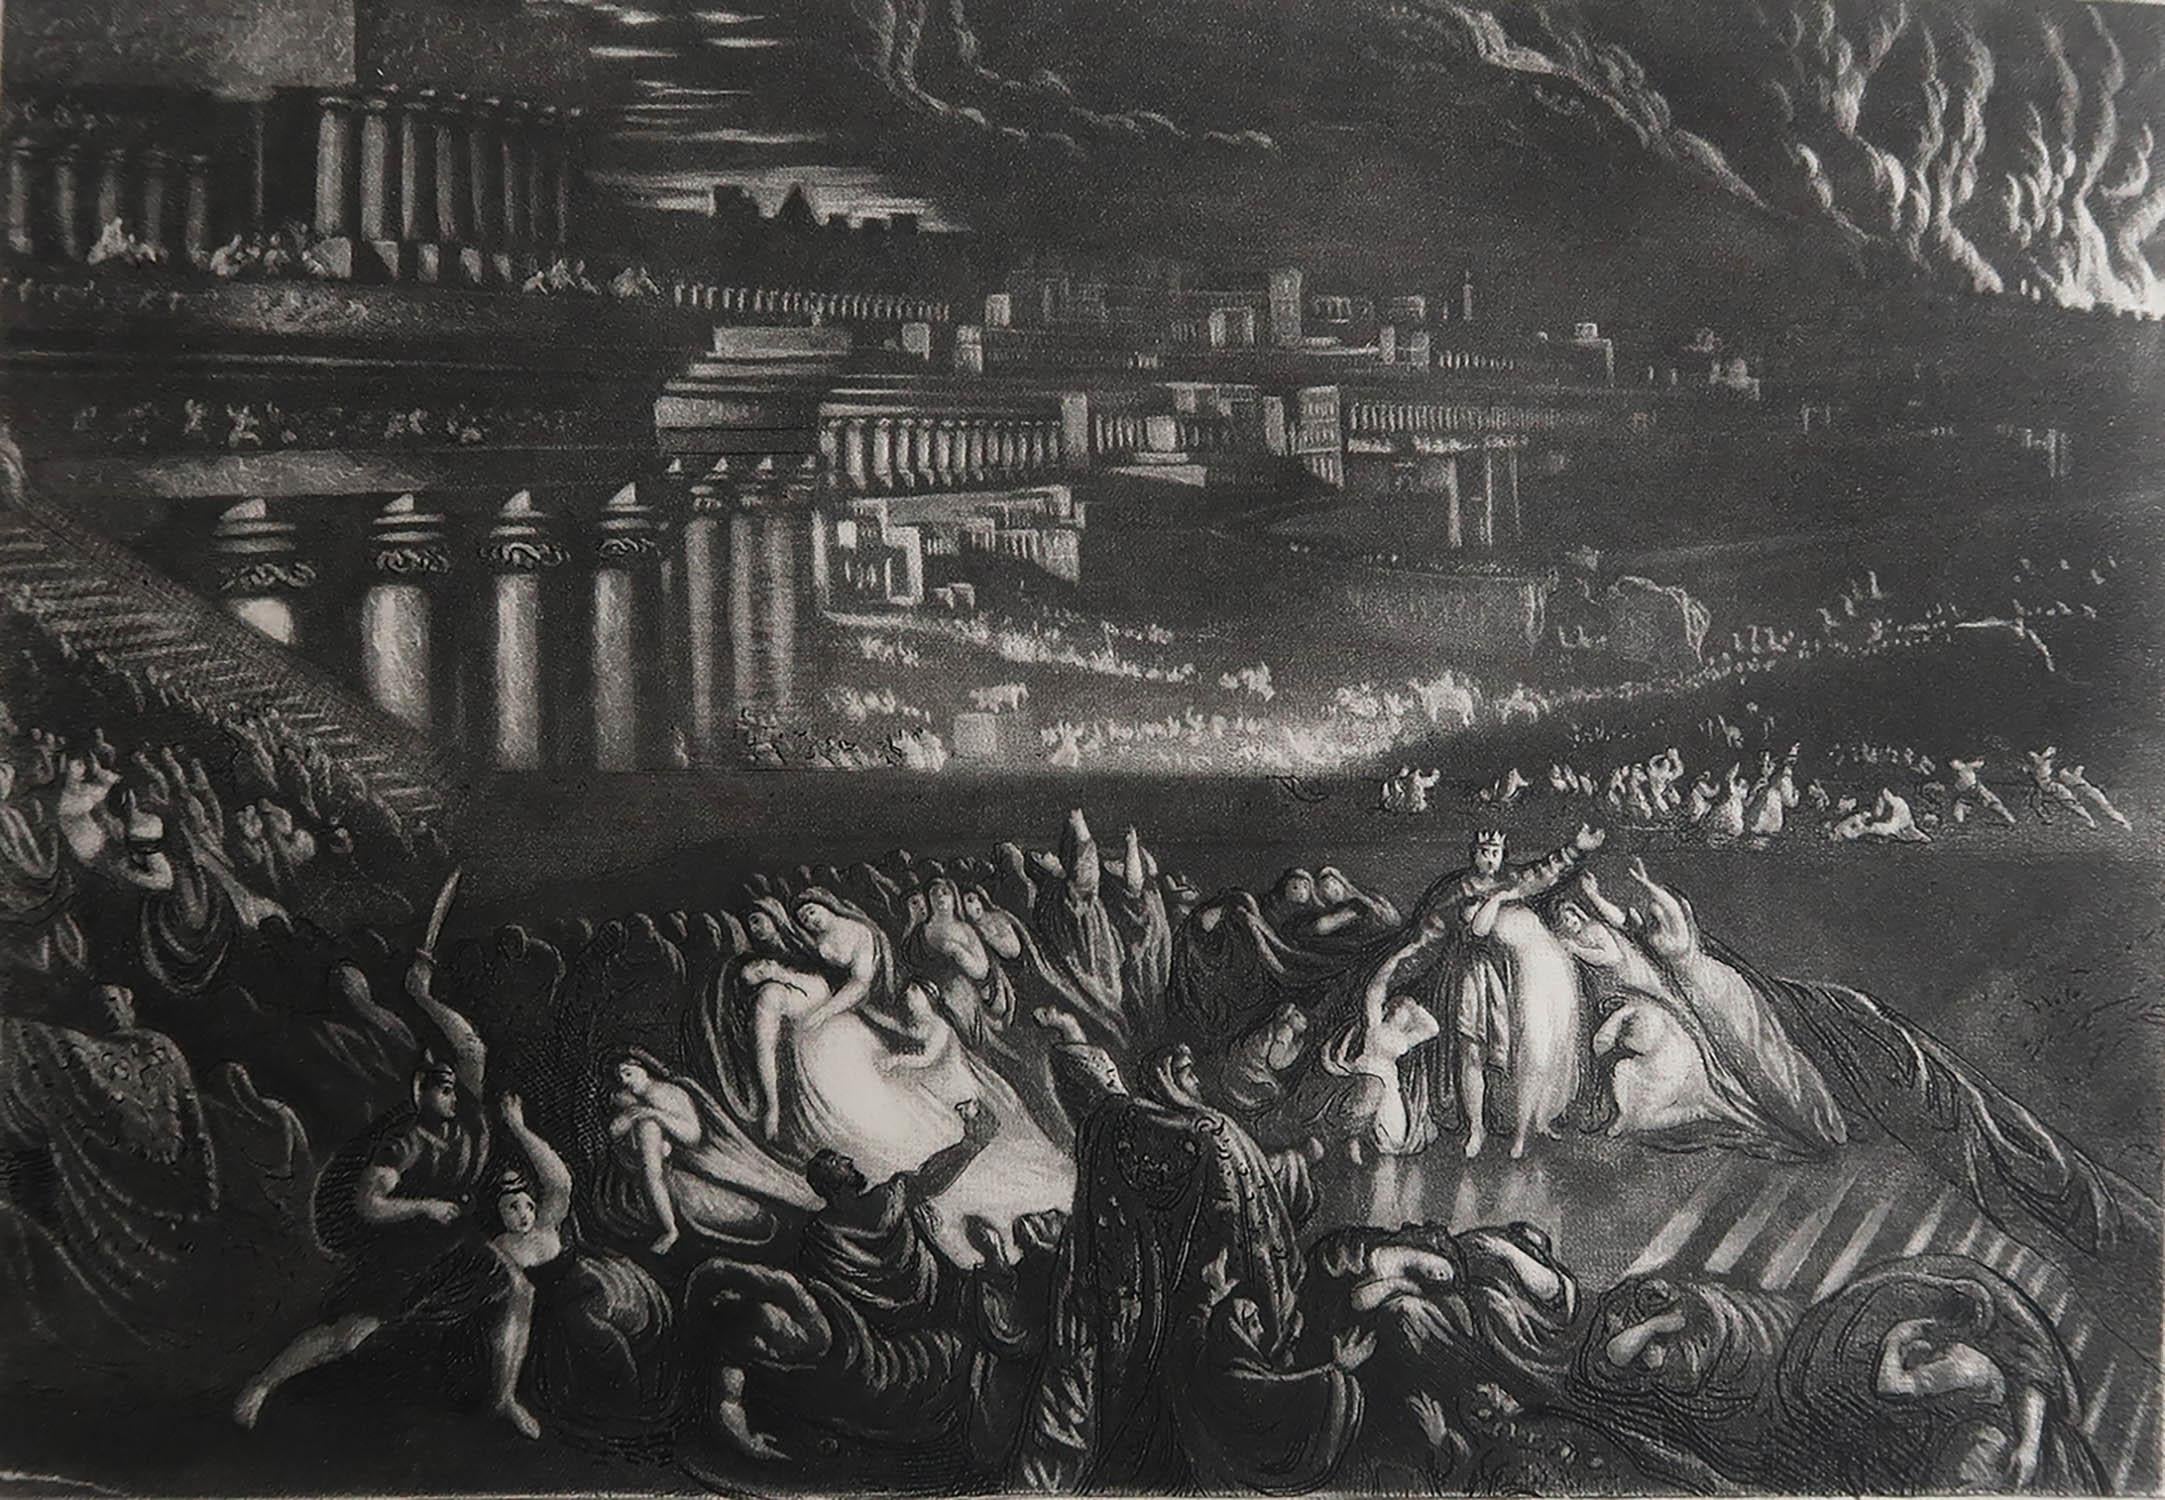 Sensational image by John Martin.

Drawn and engraved by John Martin. 

Published by Sangster

Unframed.

Repair to a tear bottom left corner

